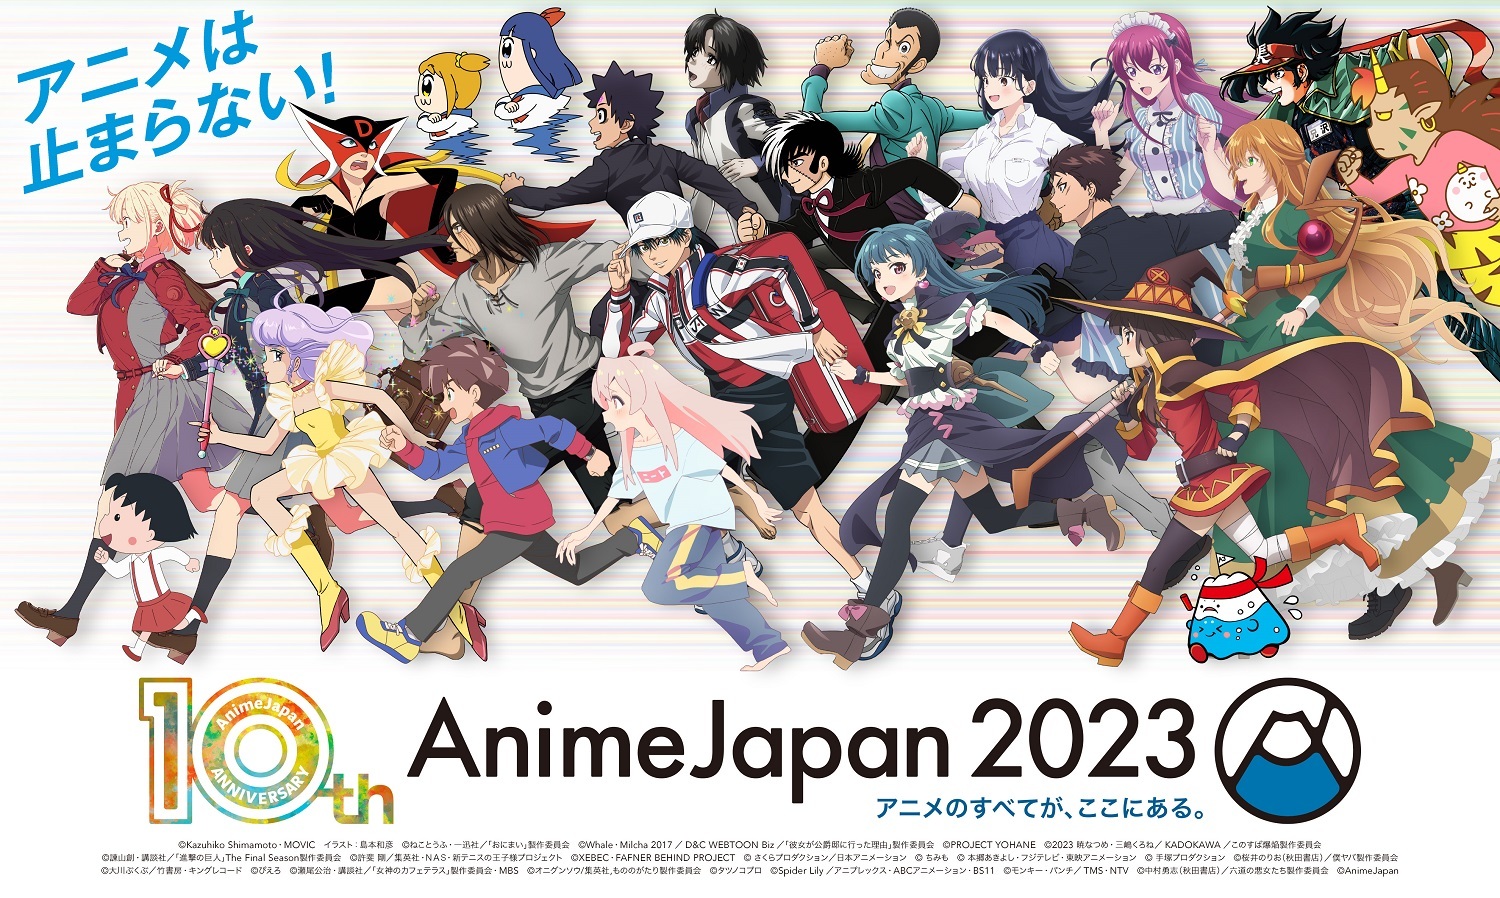 『AnimeJapan 2023』 （C）AnimeJapan 2023 All Rights Reserved.